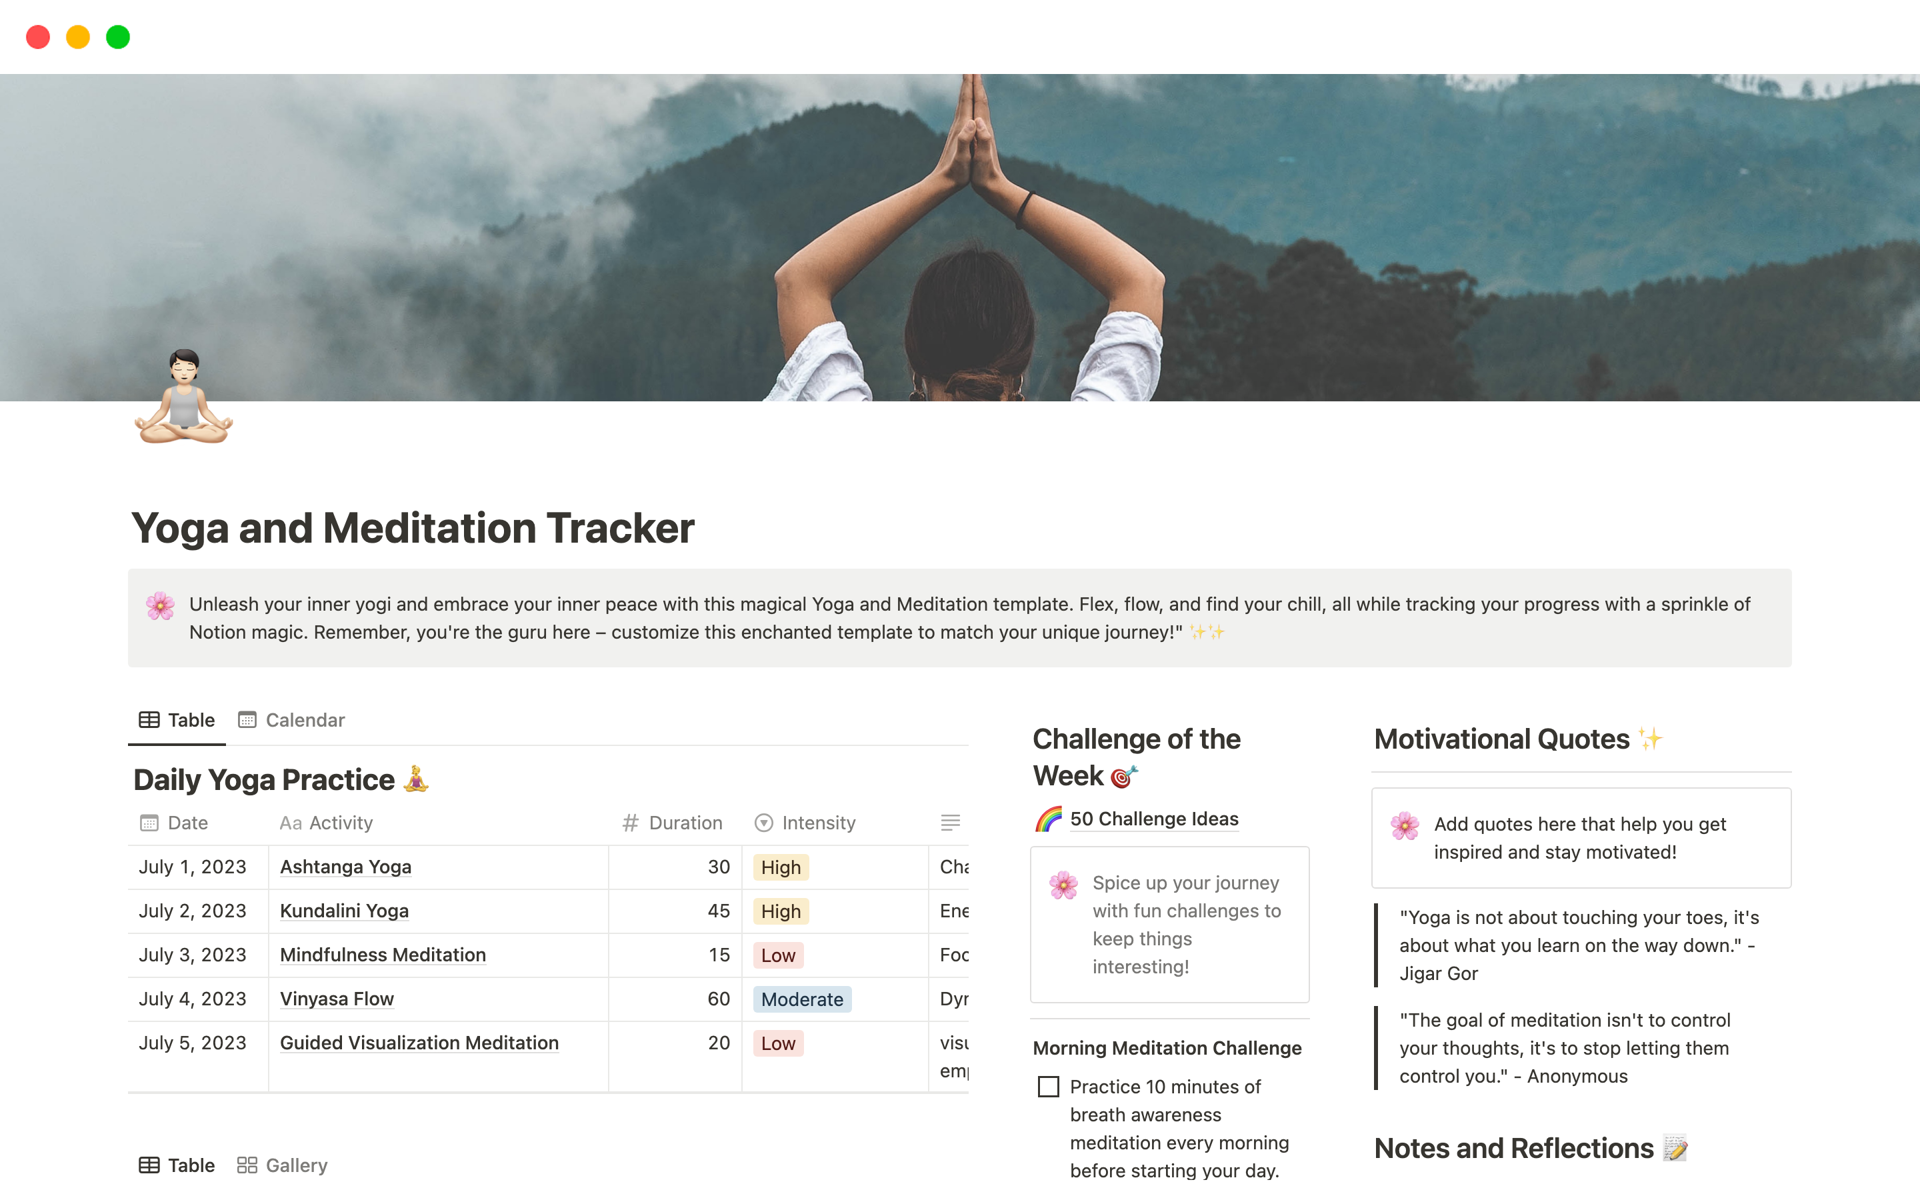 Transform your routine into a journey of wellness with our Yoga & Meditation Template. 🧘‍♀️